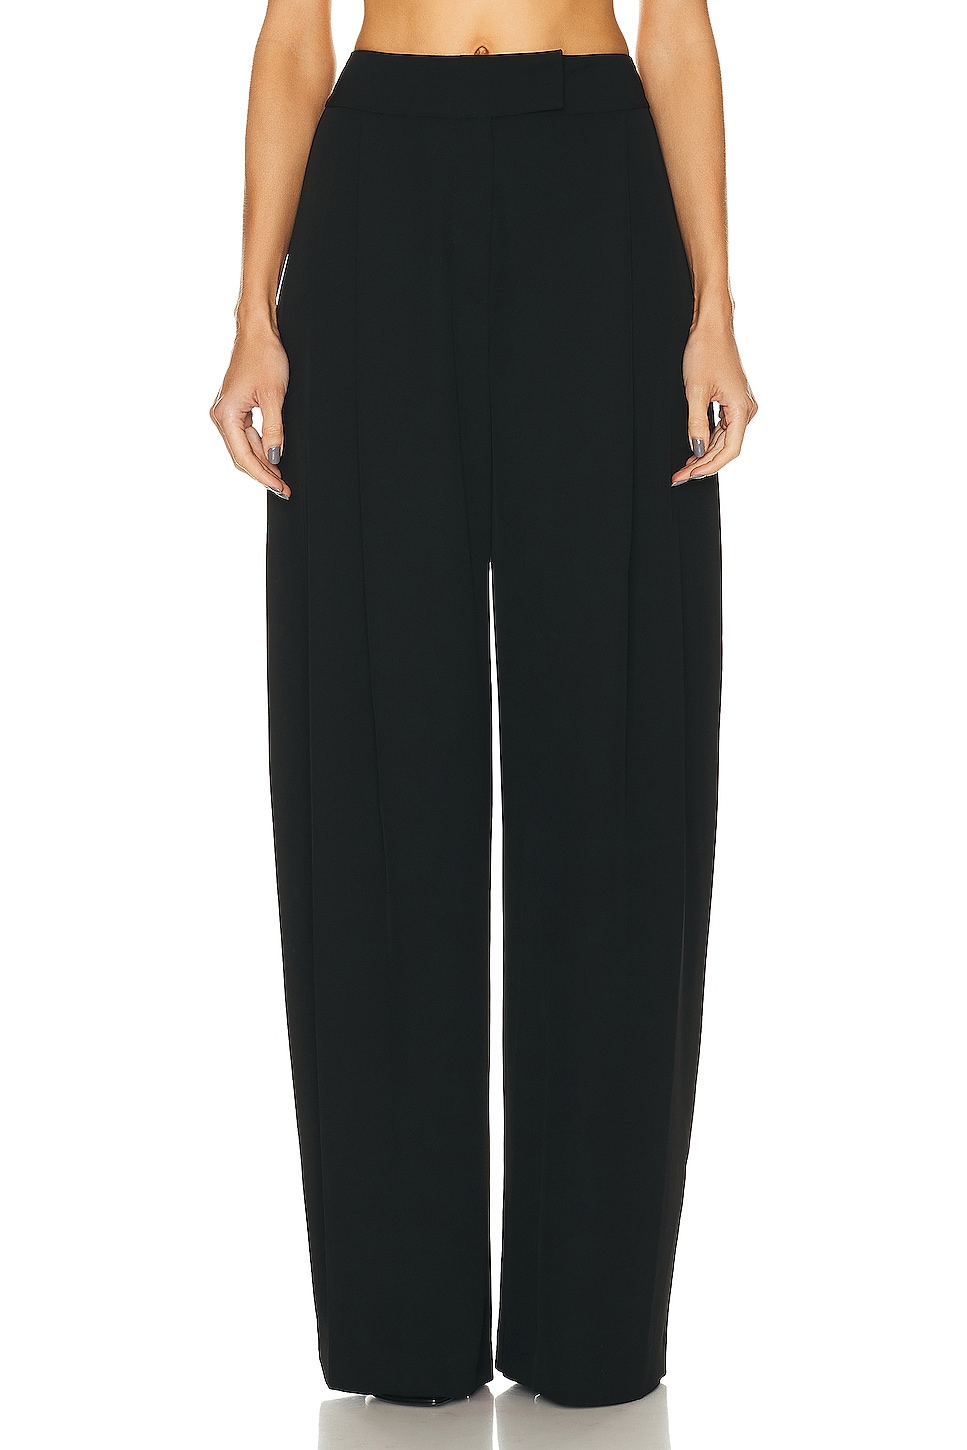 Image 1 of The Sei Baggy Pleat Trouser in Black